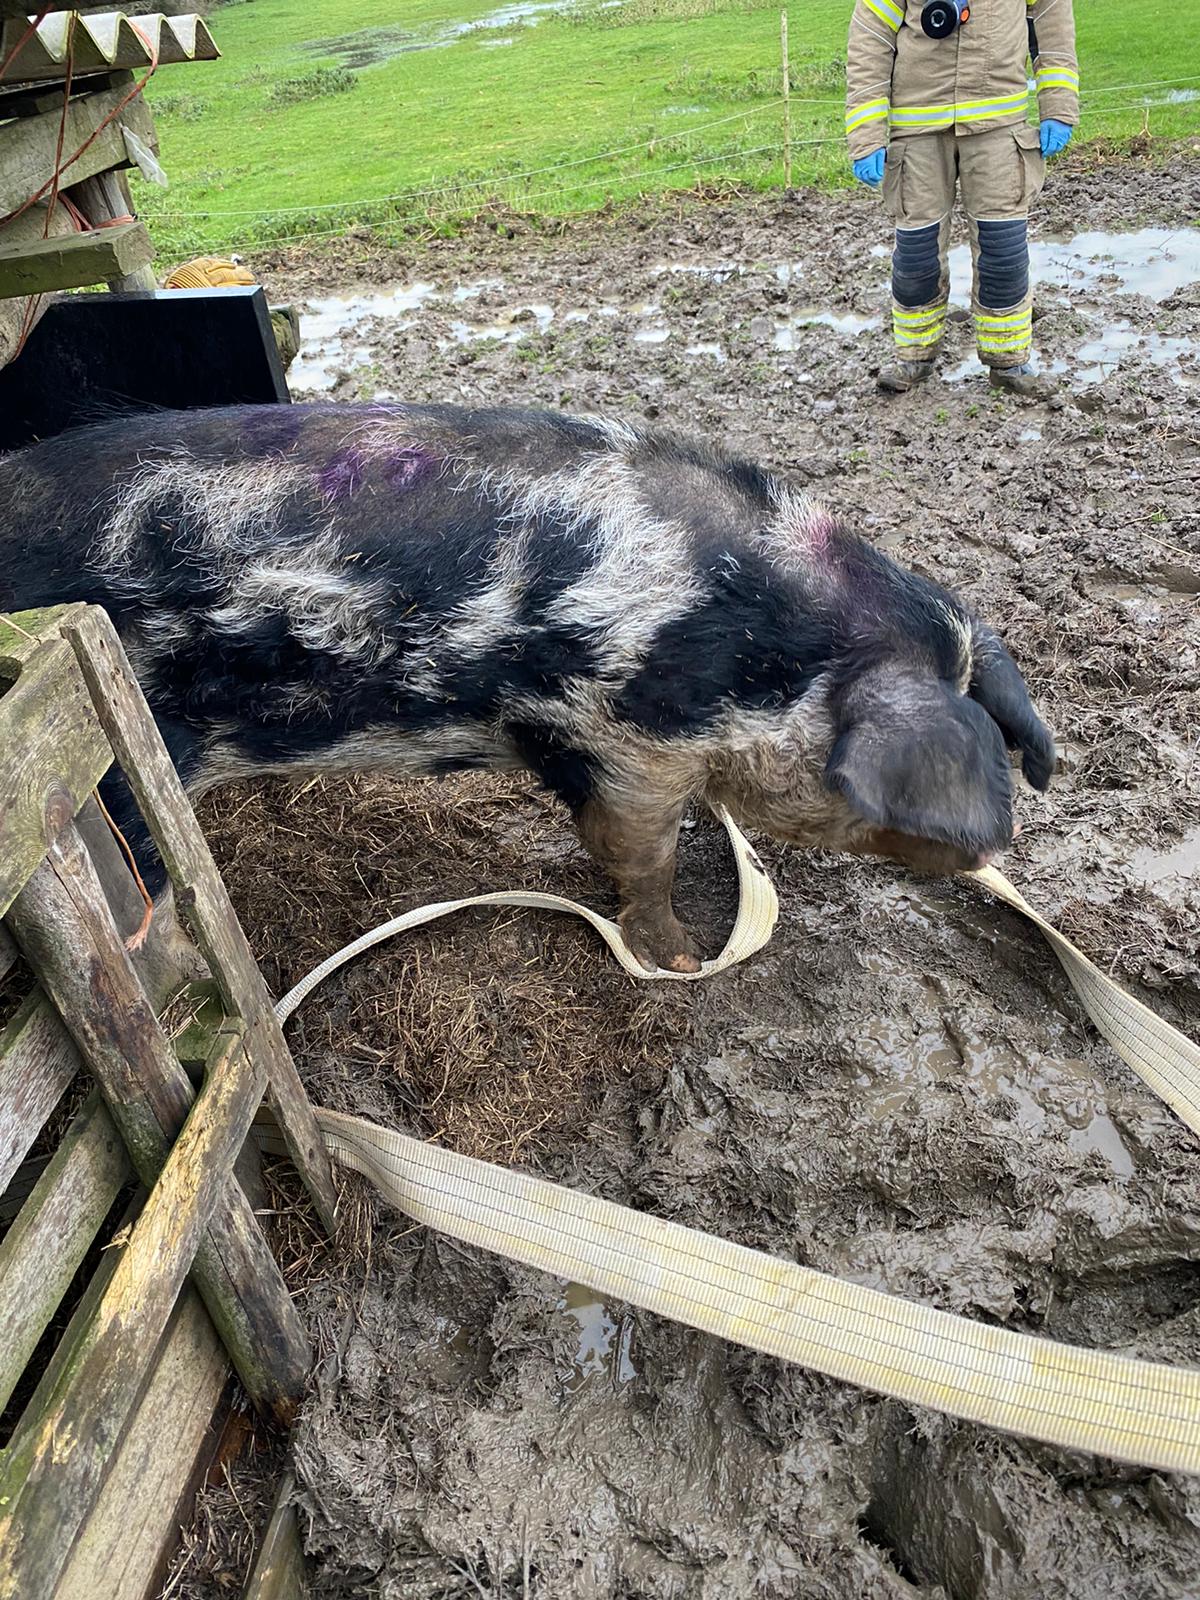 Firefighters rescued a 31-stone pig called Dolly who got stuck in the mud in Felsted, Essex. (Essex County Fire and Rescue Service/ PA)